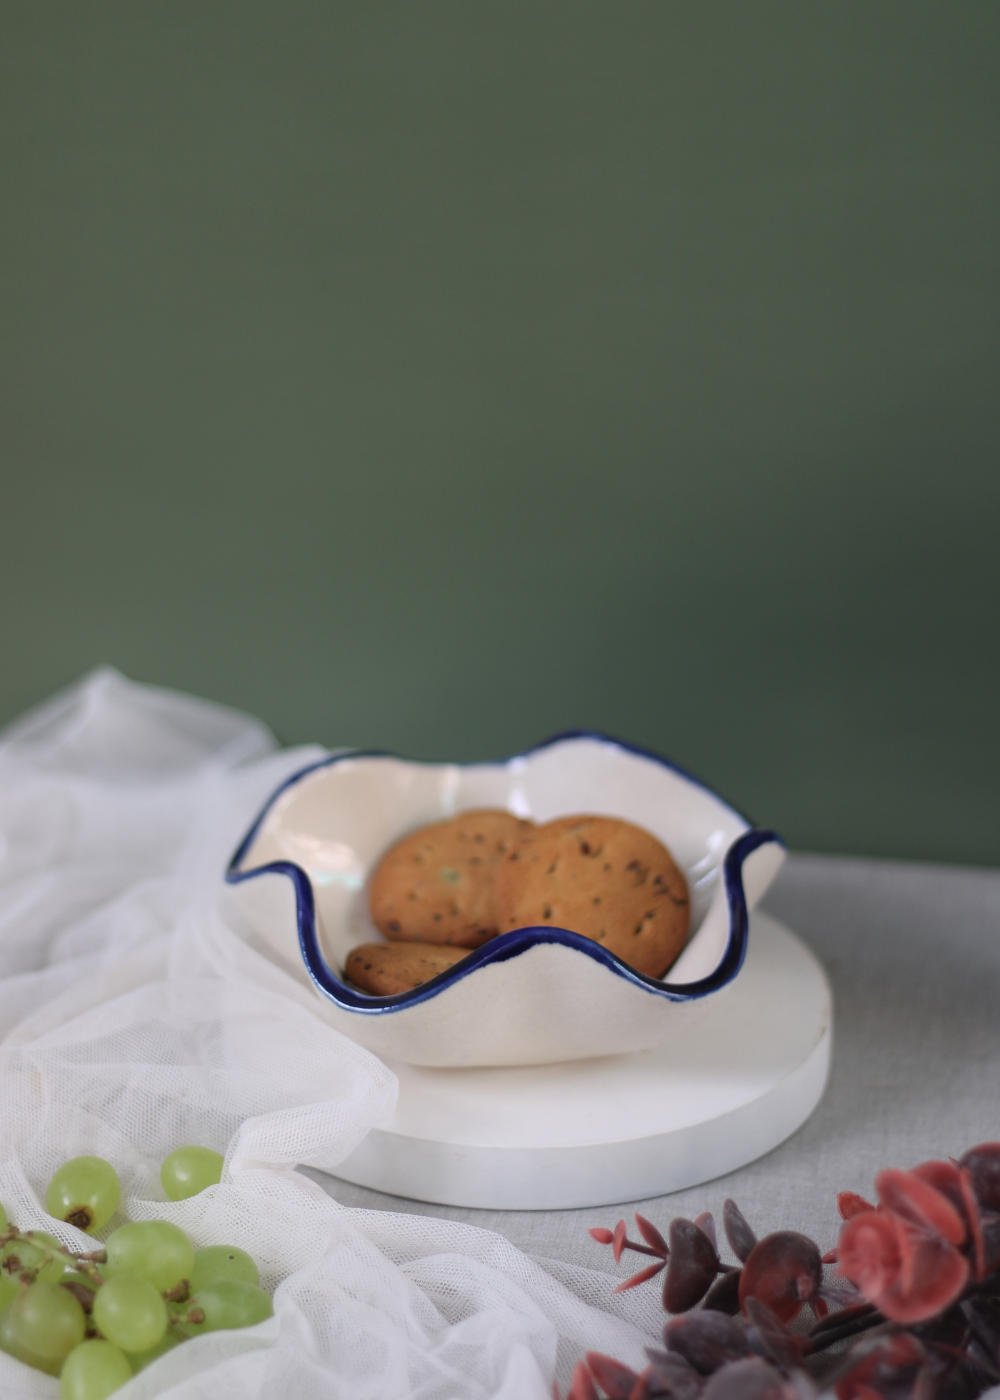 White & Blue Curvy Bowl With Biscuits